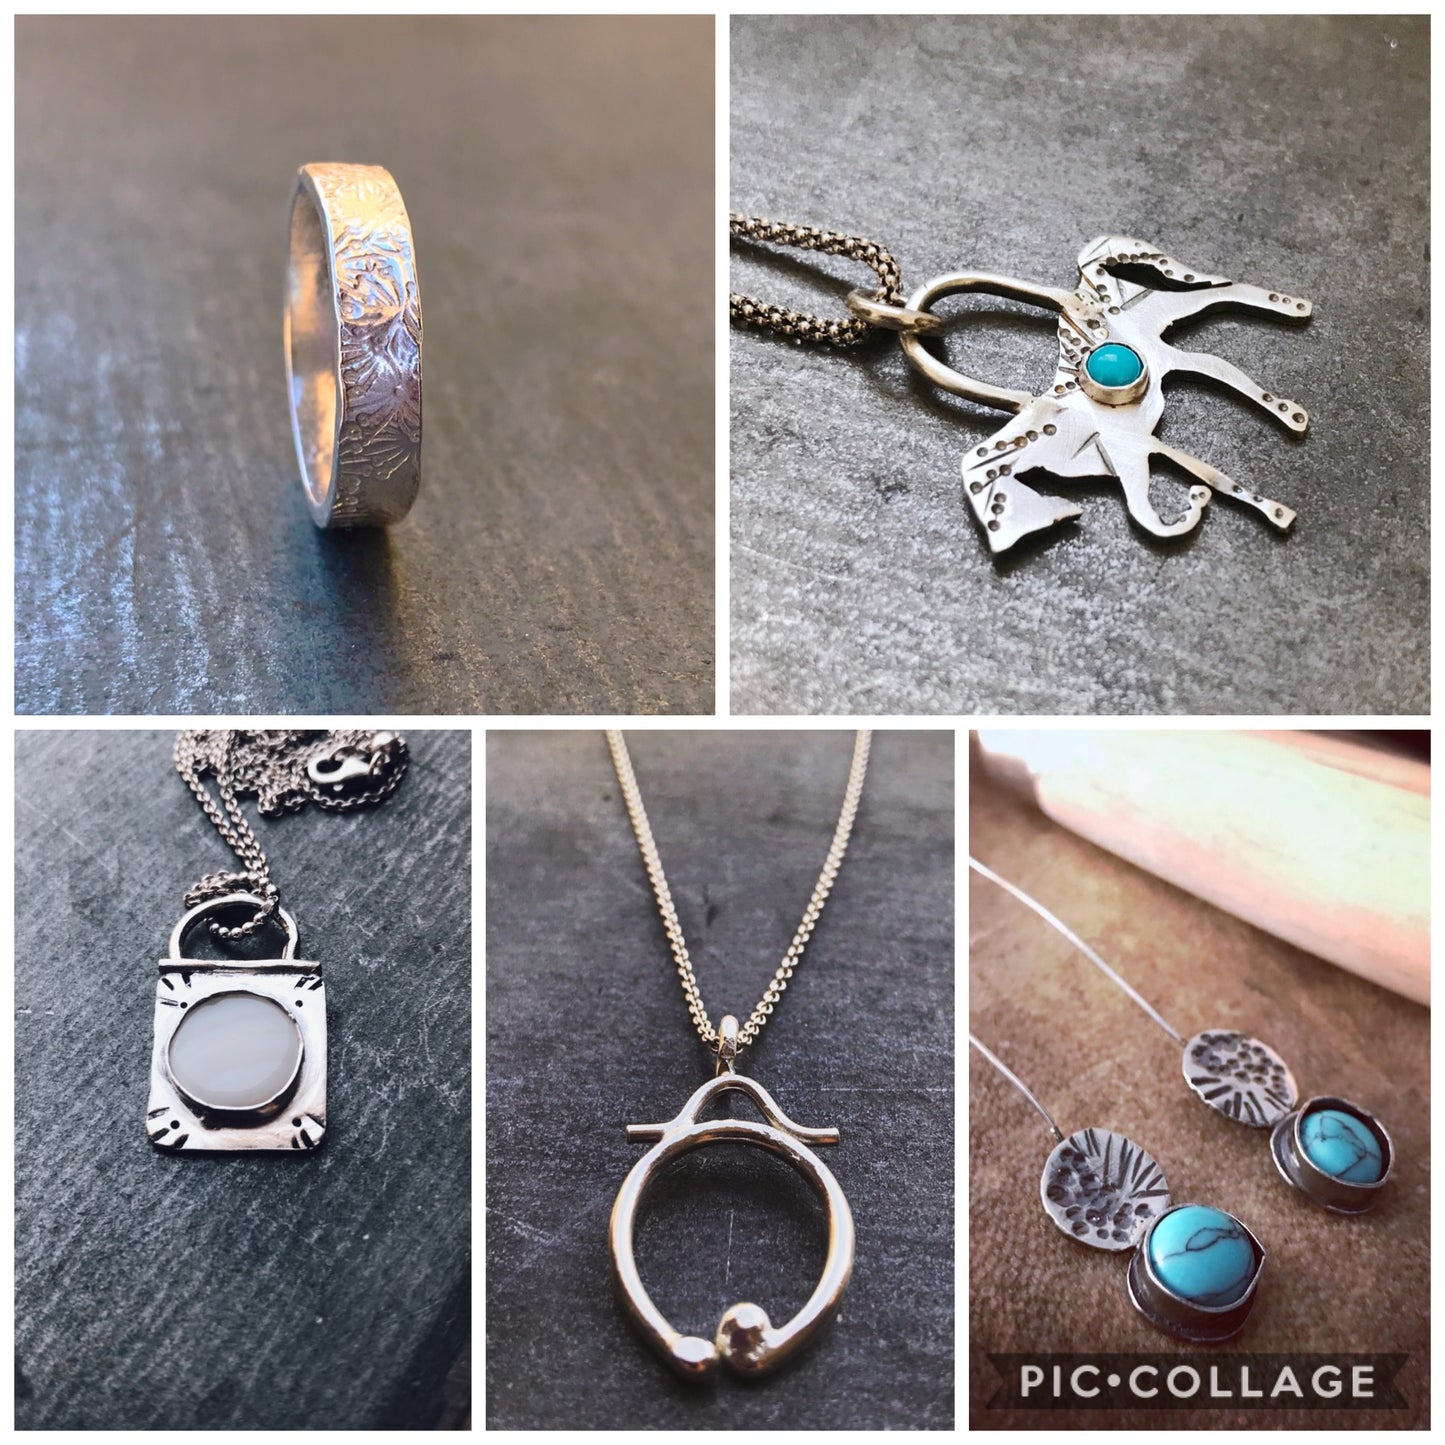 Complete day in Silver Jewelry making